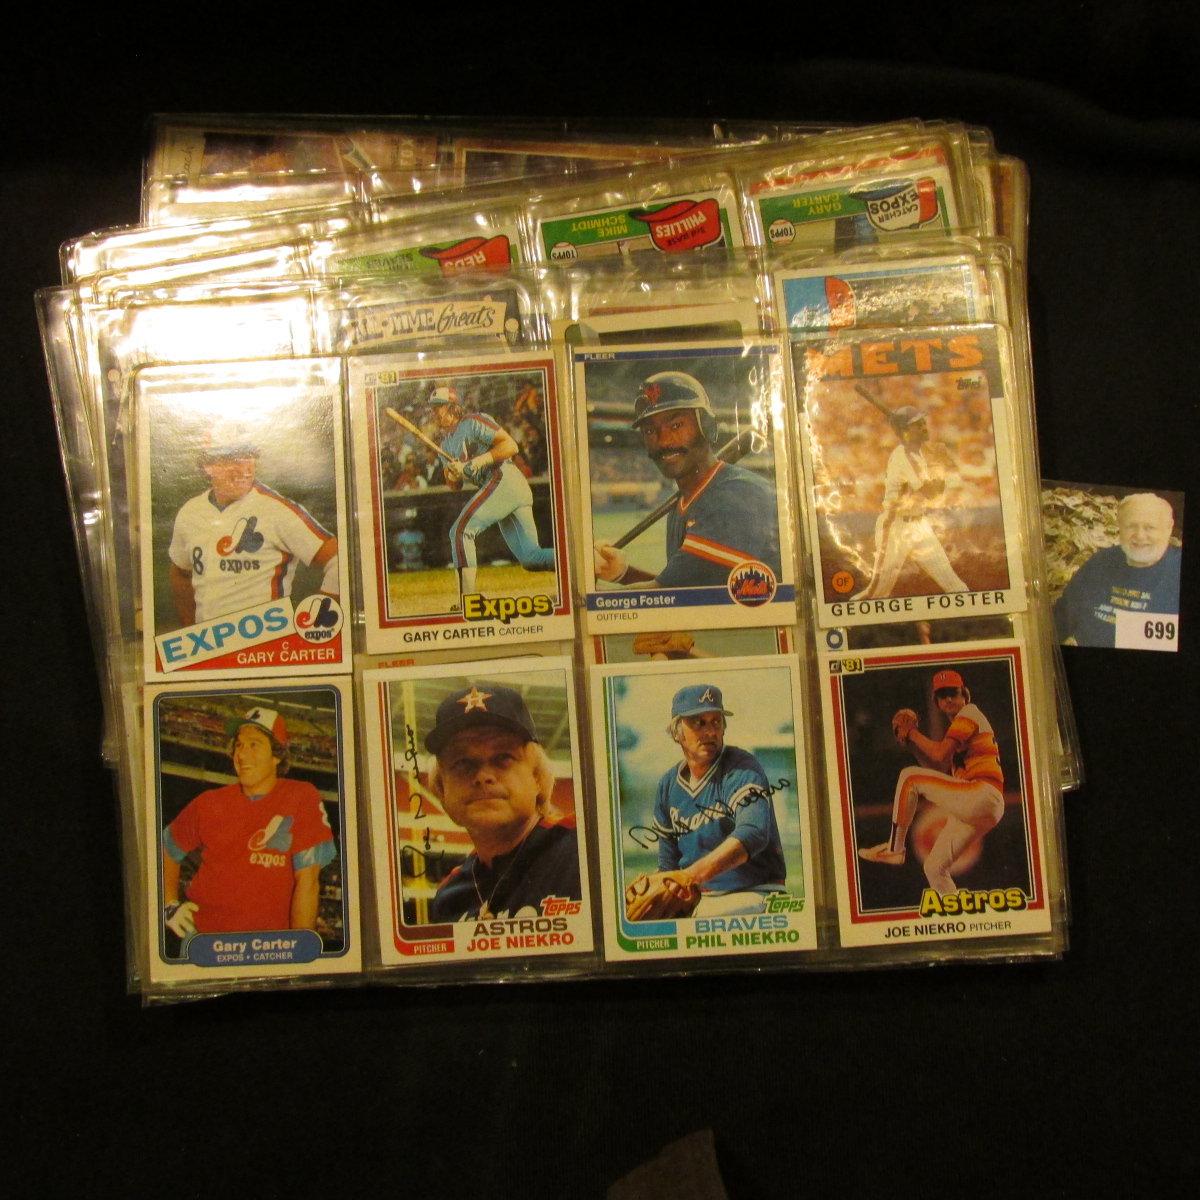 A group of more than (20) Plastic pages with Baseball Cards, some of which have been autographed. A